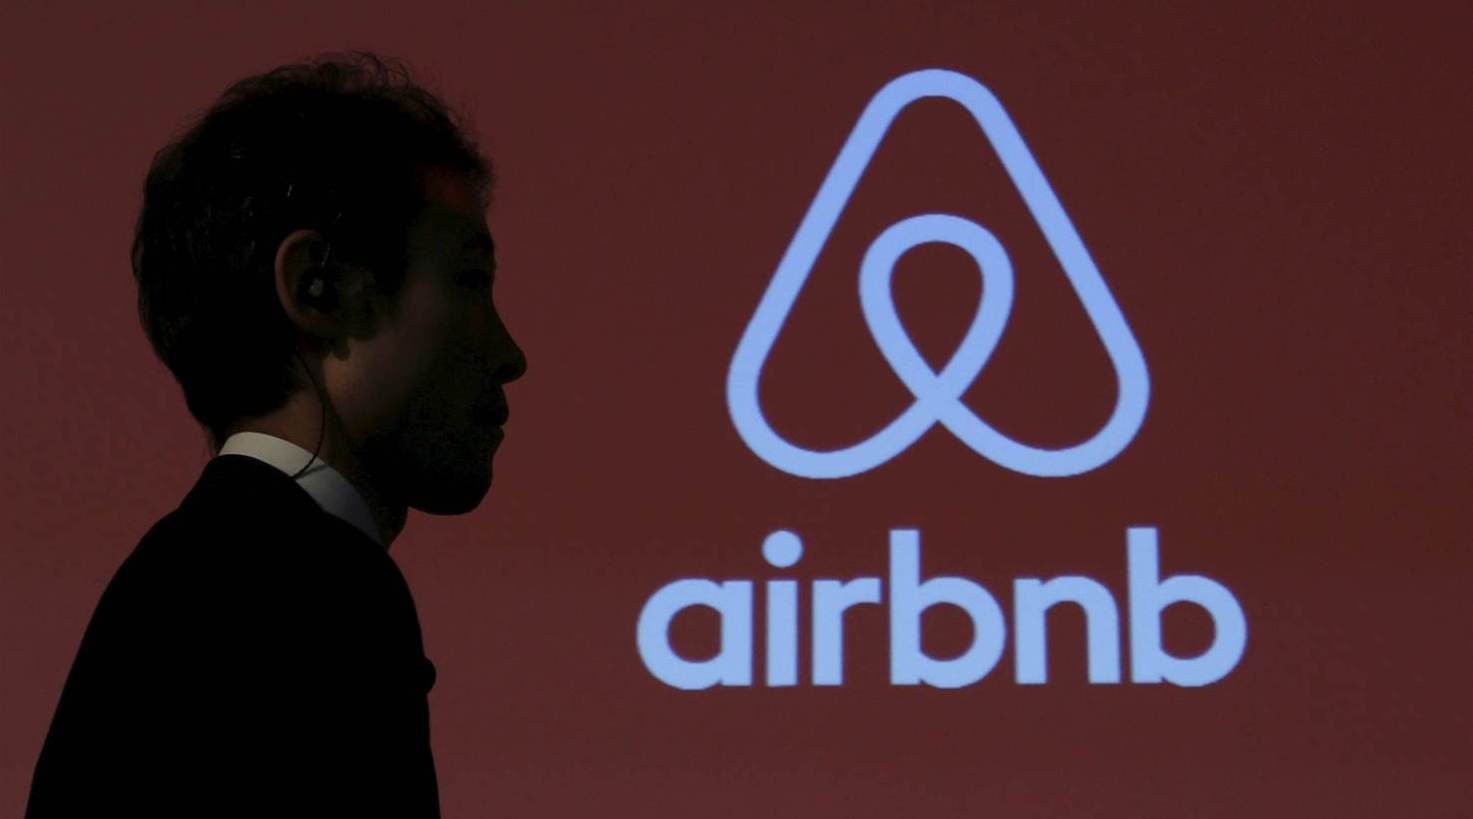 Airbnb appoints China operations head after long search